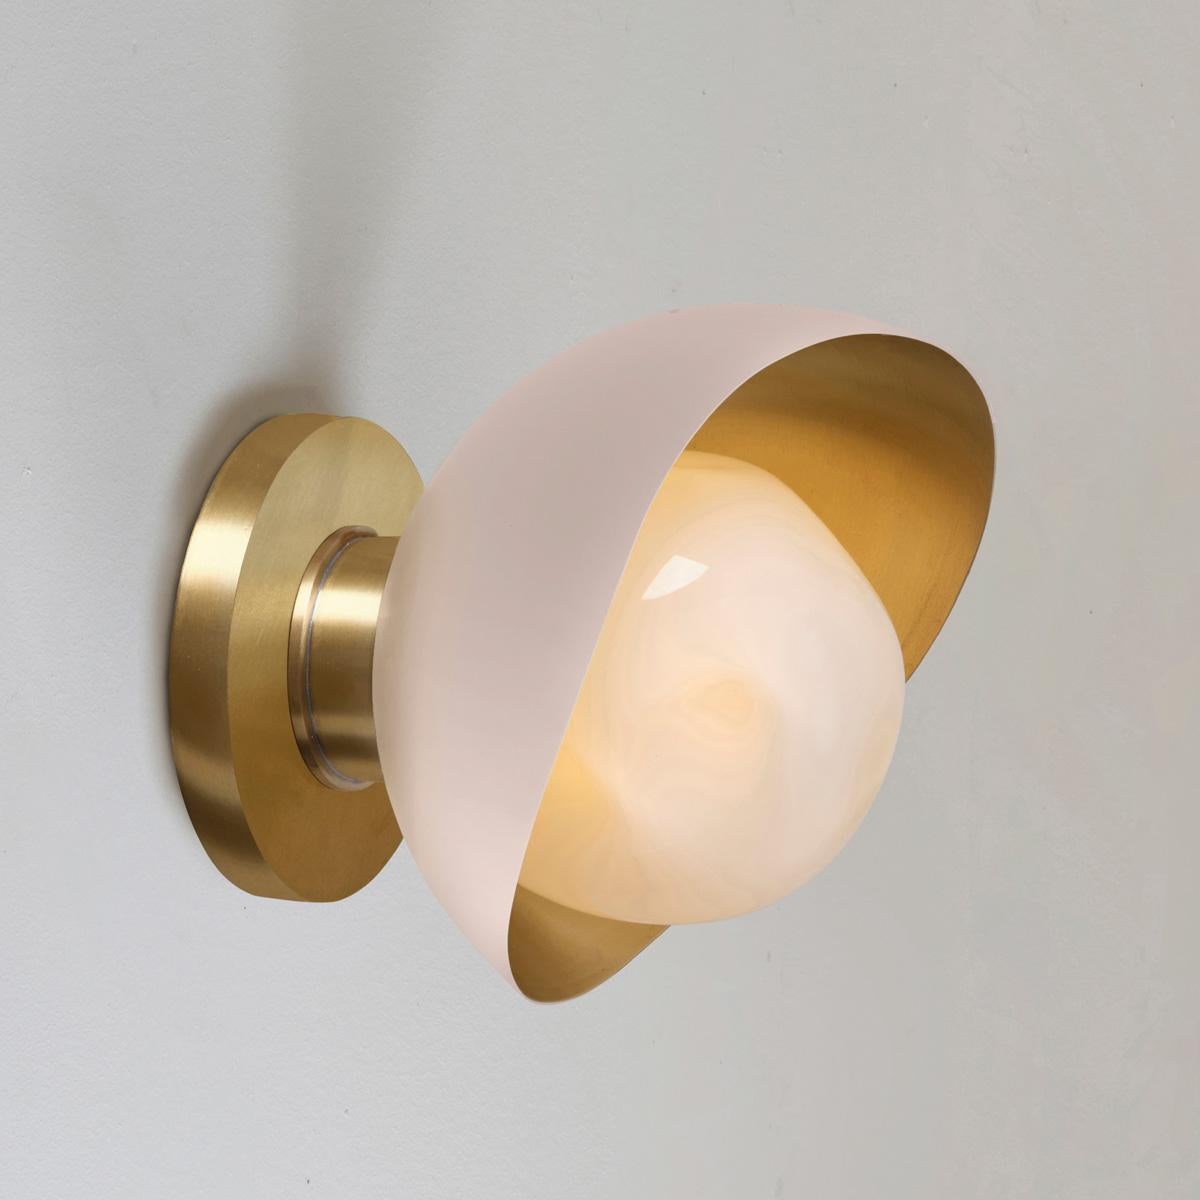 The Perla Mini wall light is the smallest member of the Perla collection featuring an organic brass shell nestling our Sfera glass handblown in Murano. See the Perla and Perla Grande for larger models.

The primary images show it in Powder Pink and